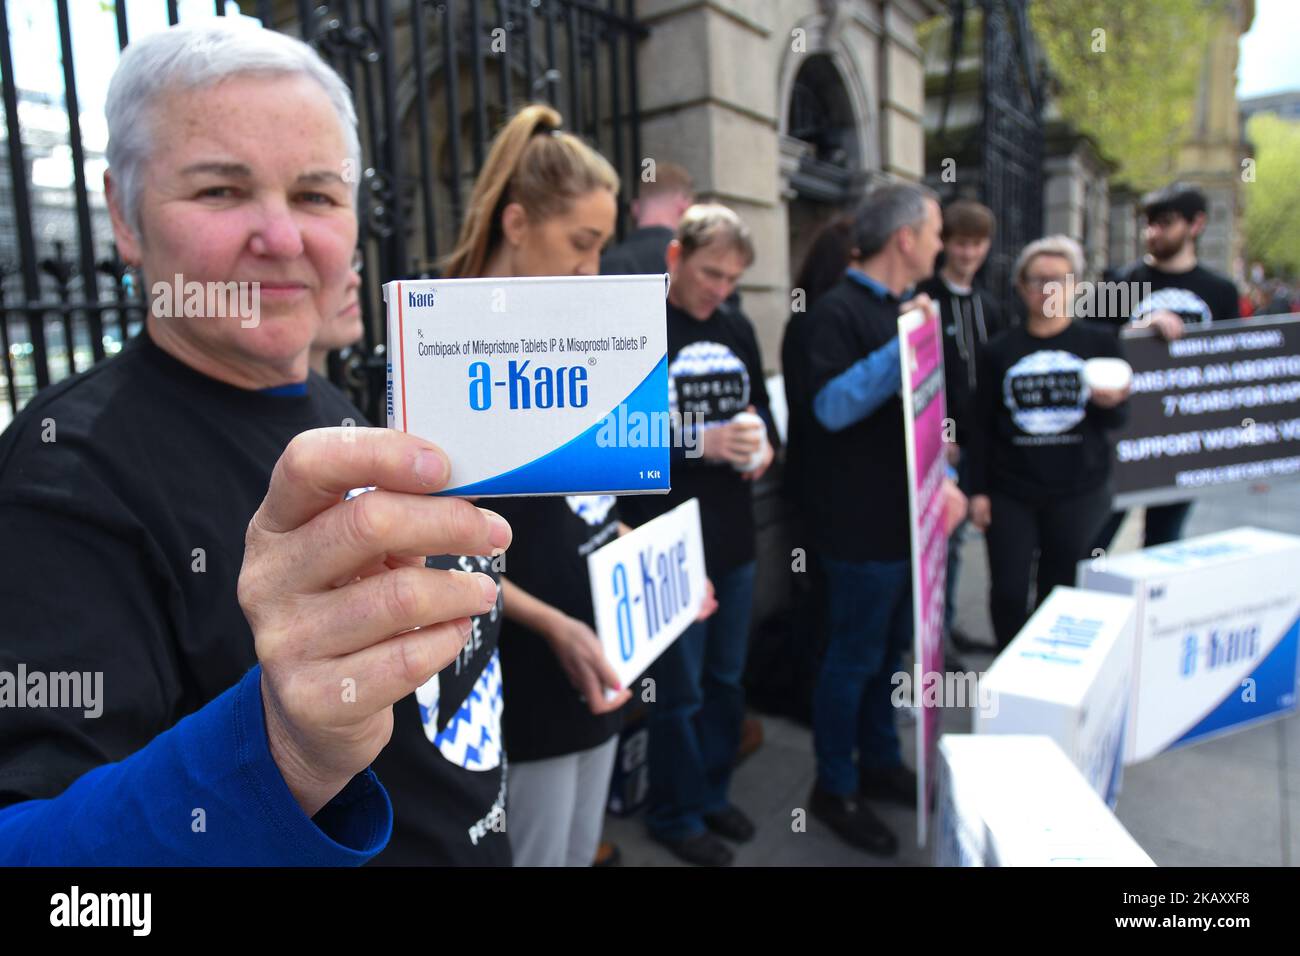 Brid Smith TD and other members of People Before Profit political party, hold signs, billboards, and packs of a kare abortion pills outside Leinster House, advocating repeal of the Eighth Amendment of the Irish Constitution - the referendum takes place on May 25th. On Thursday, May 10, 2018, in Dublin, Ireland. (Photo by Artur Widak/NurPhoto)  Stock Photo